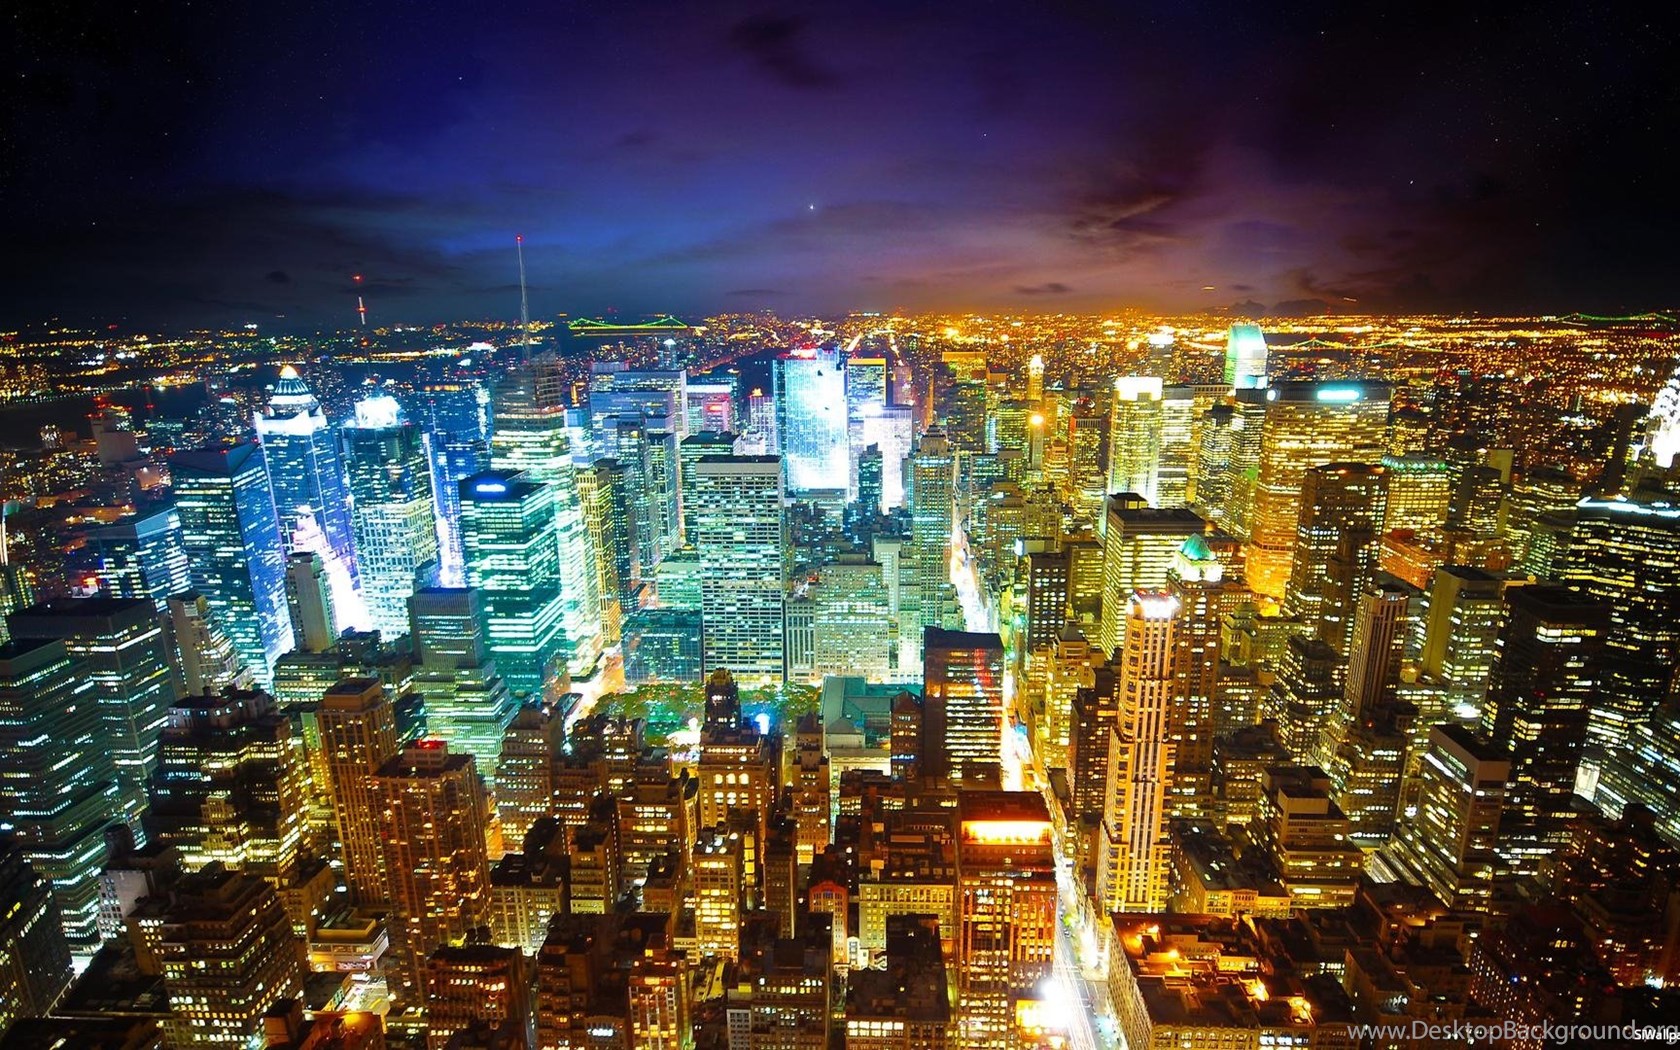 High Resolution New York City Skyline Wallpapers Hd 7 Image Full Images, Photos, Reviews